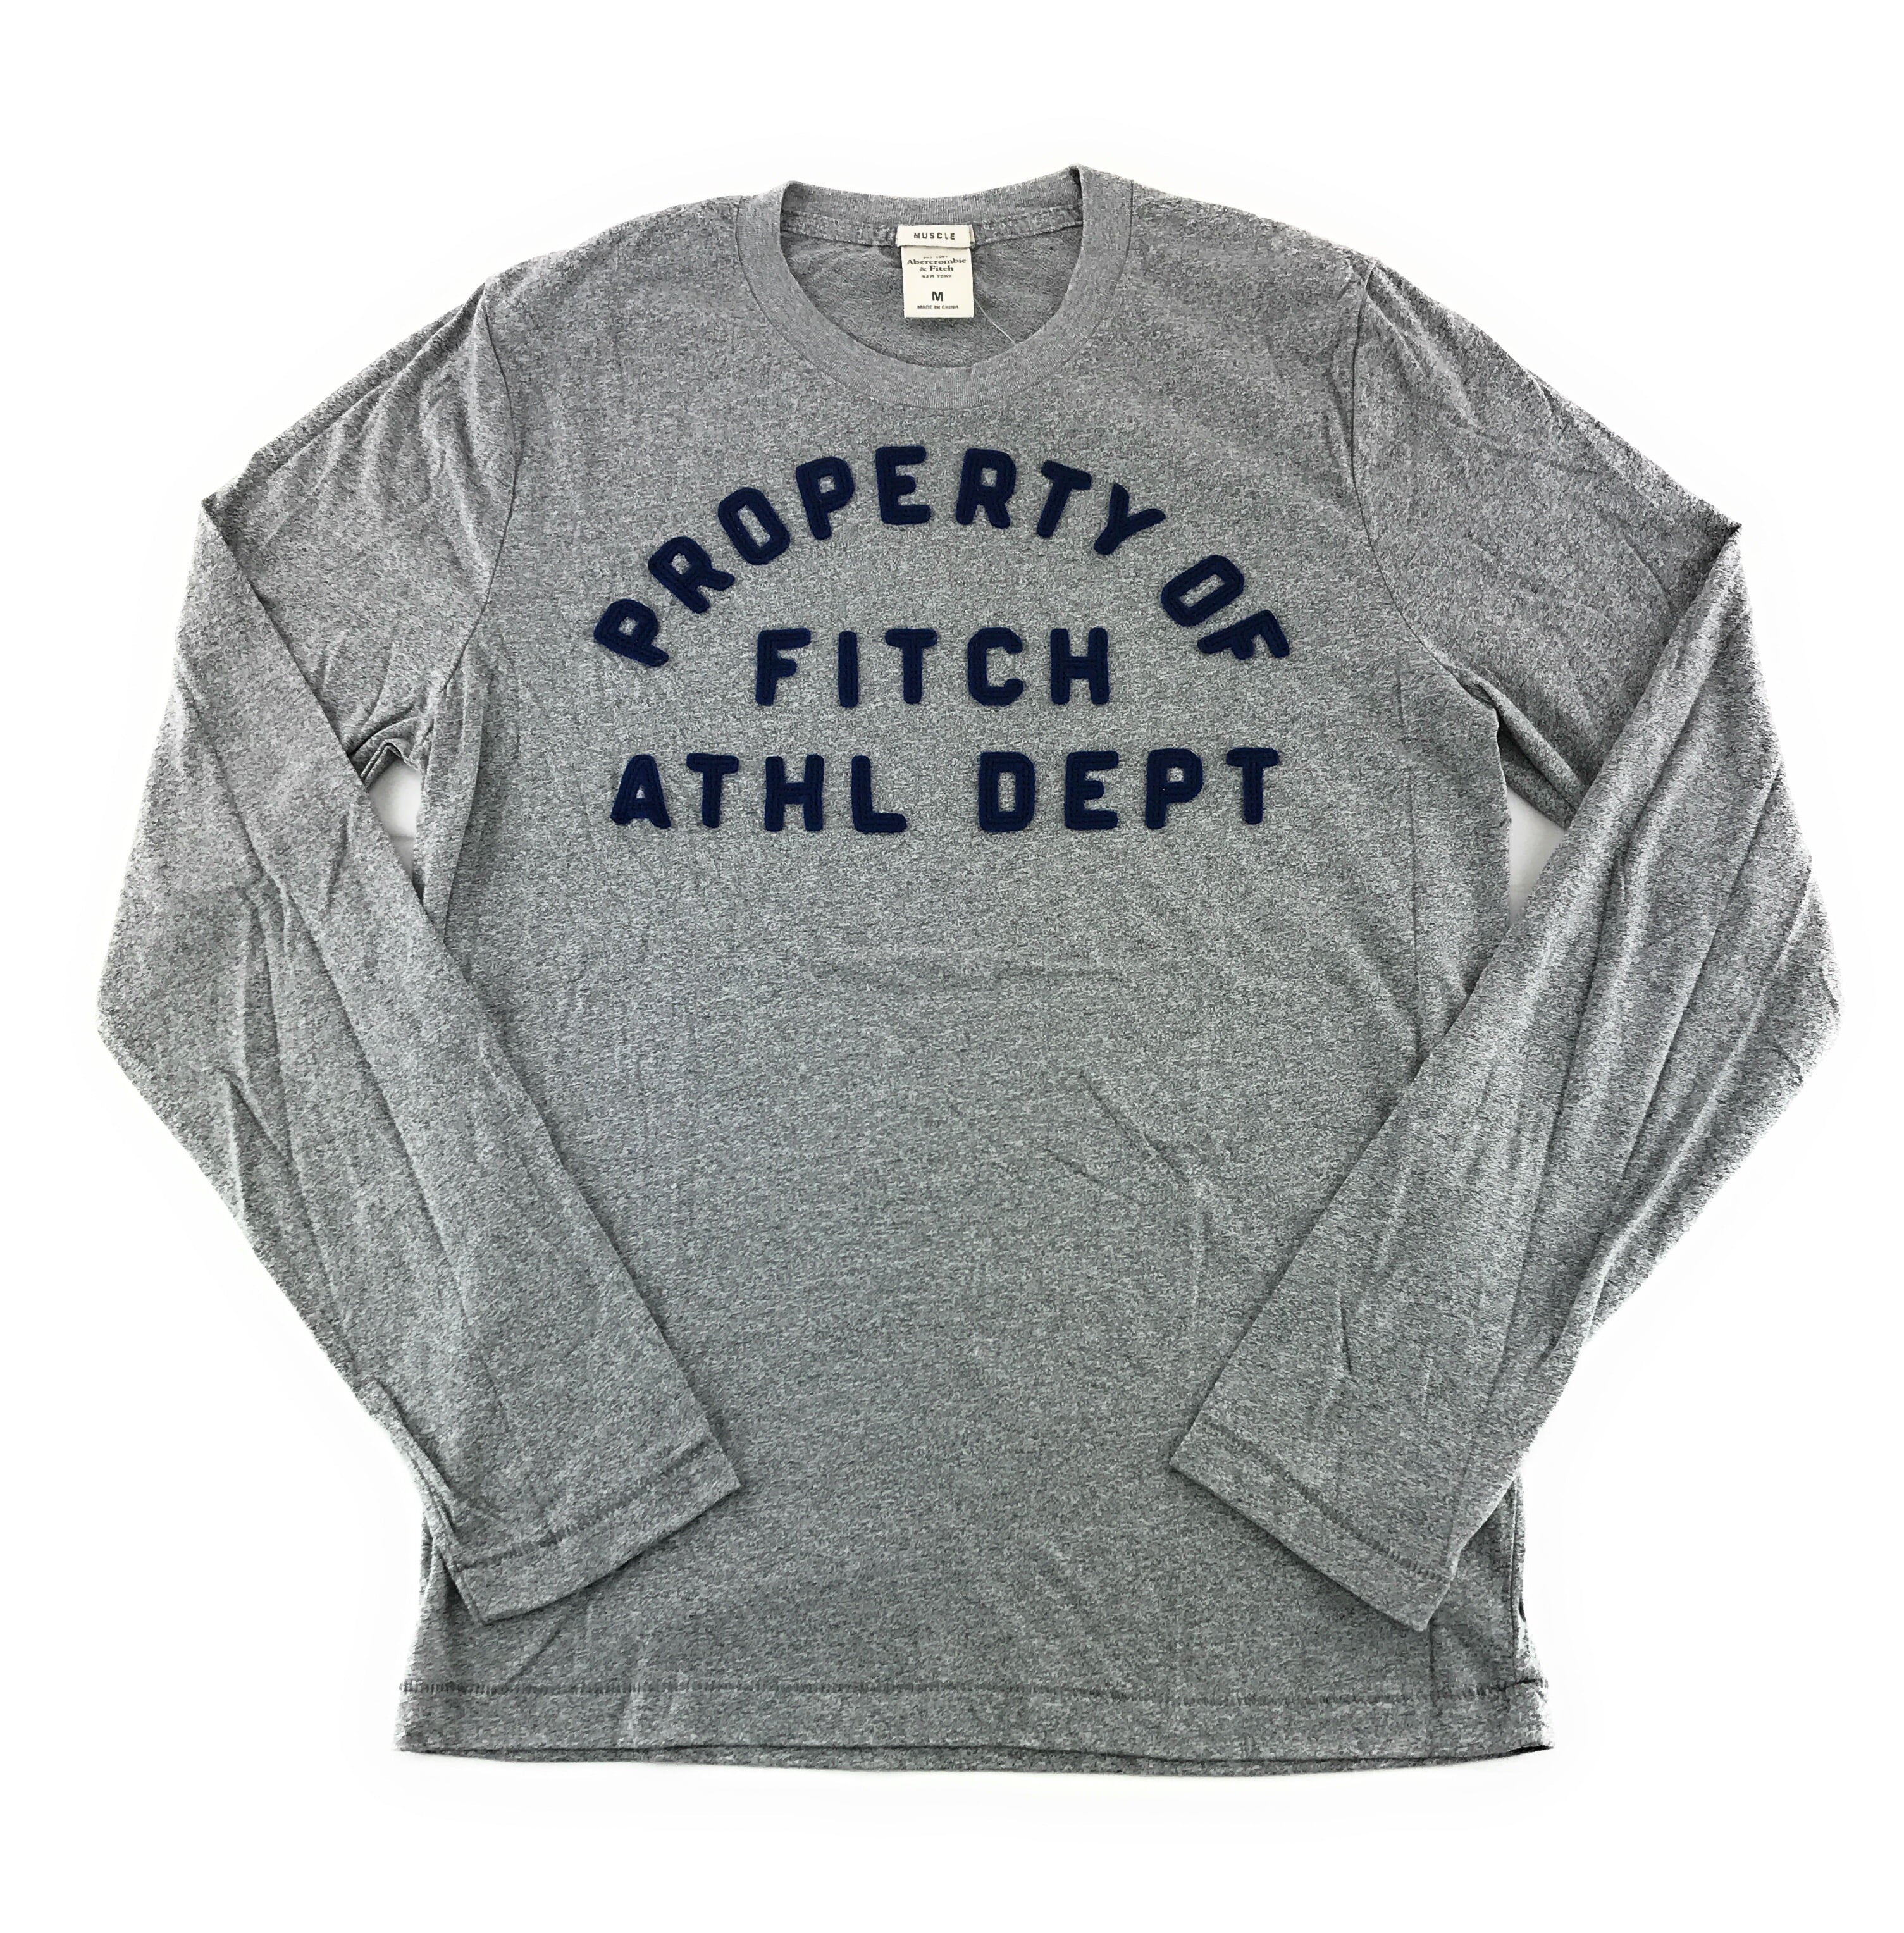 abercrombie & fitch long sleeve tee